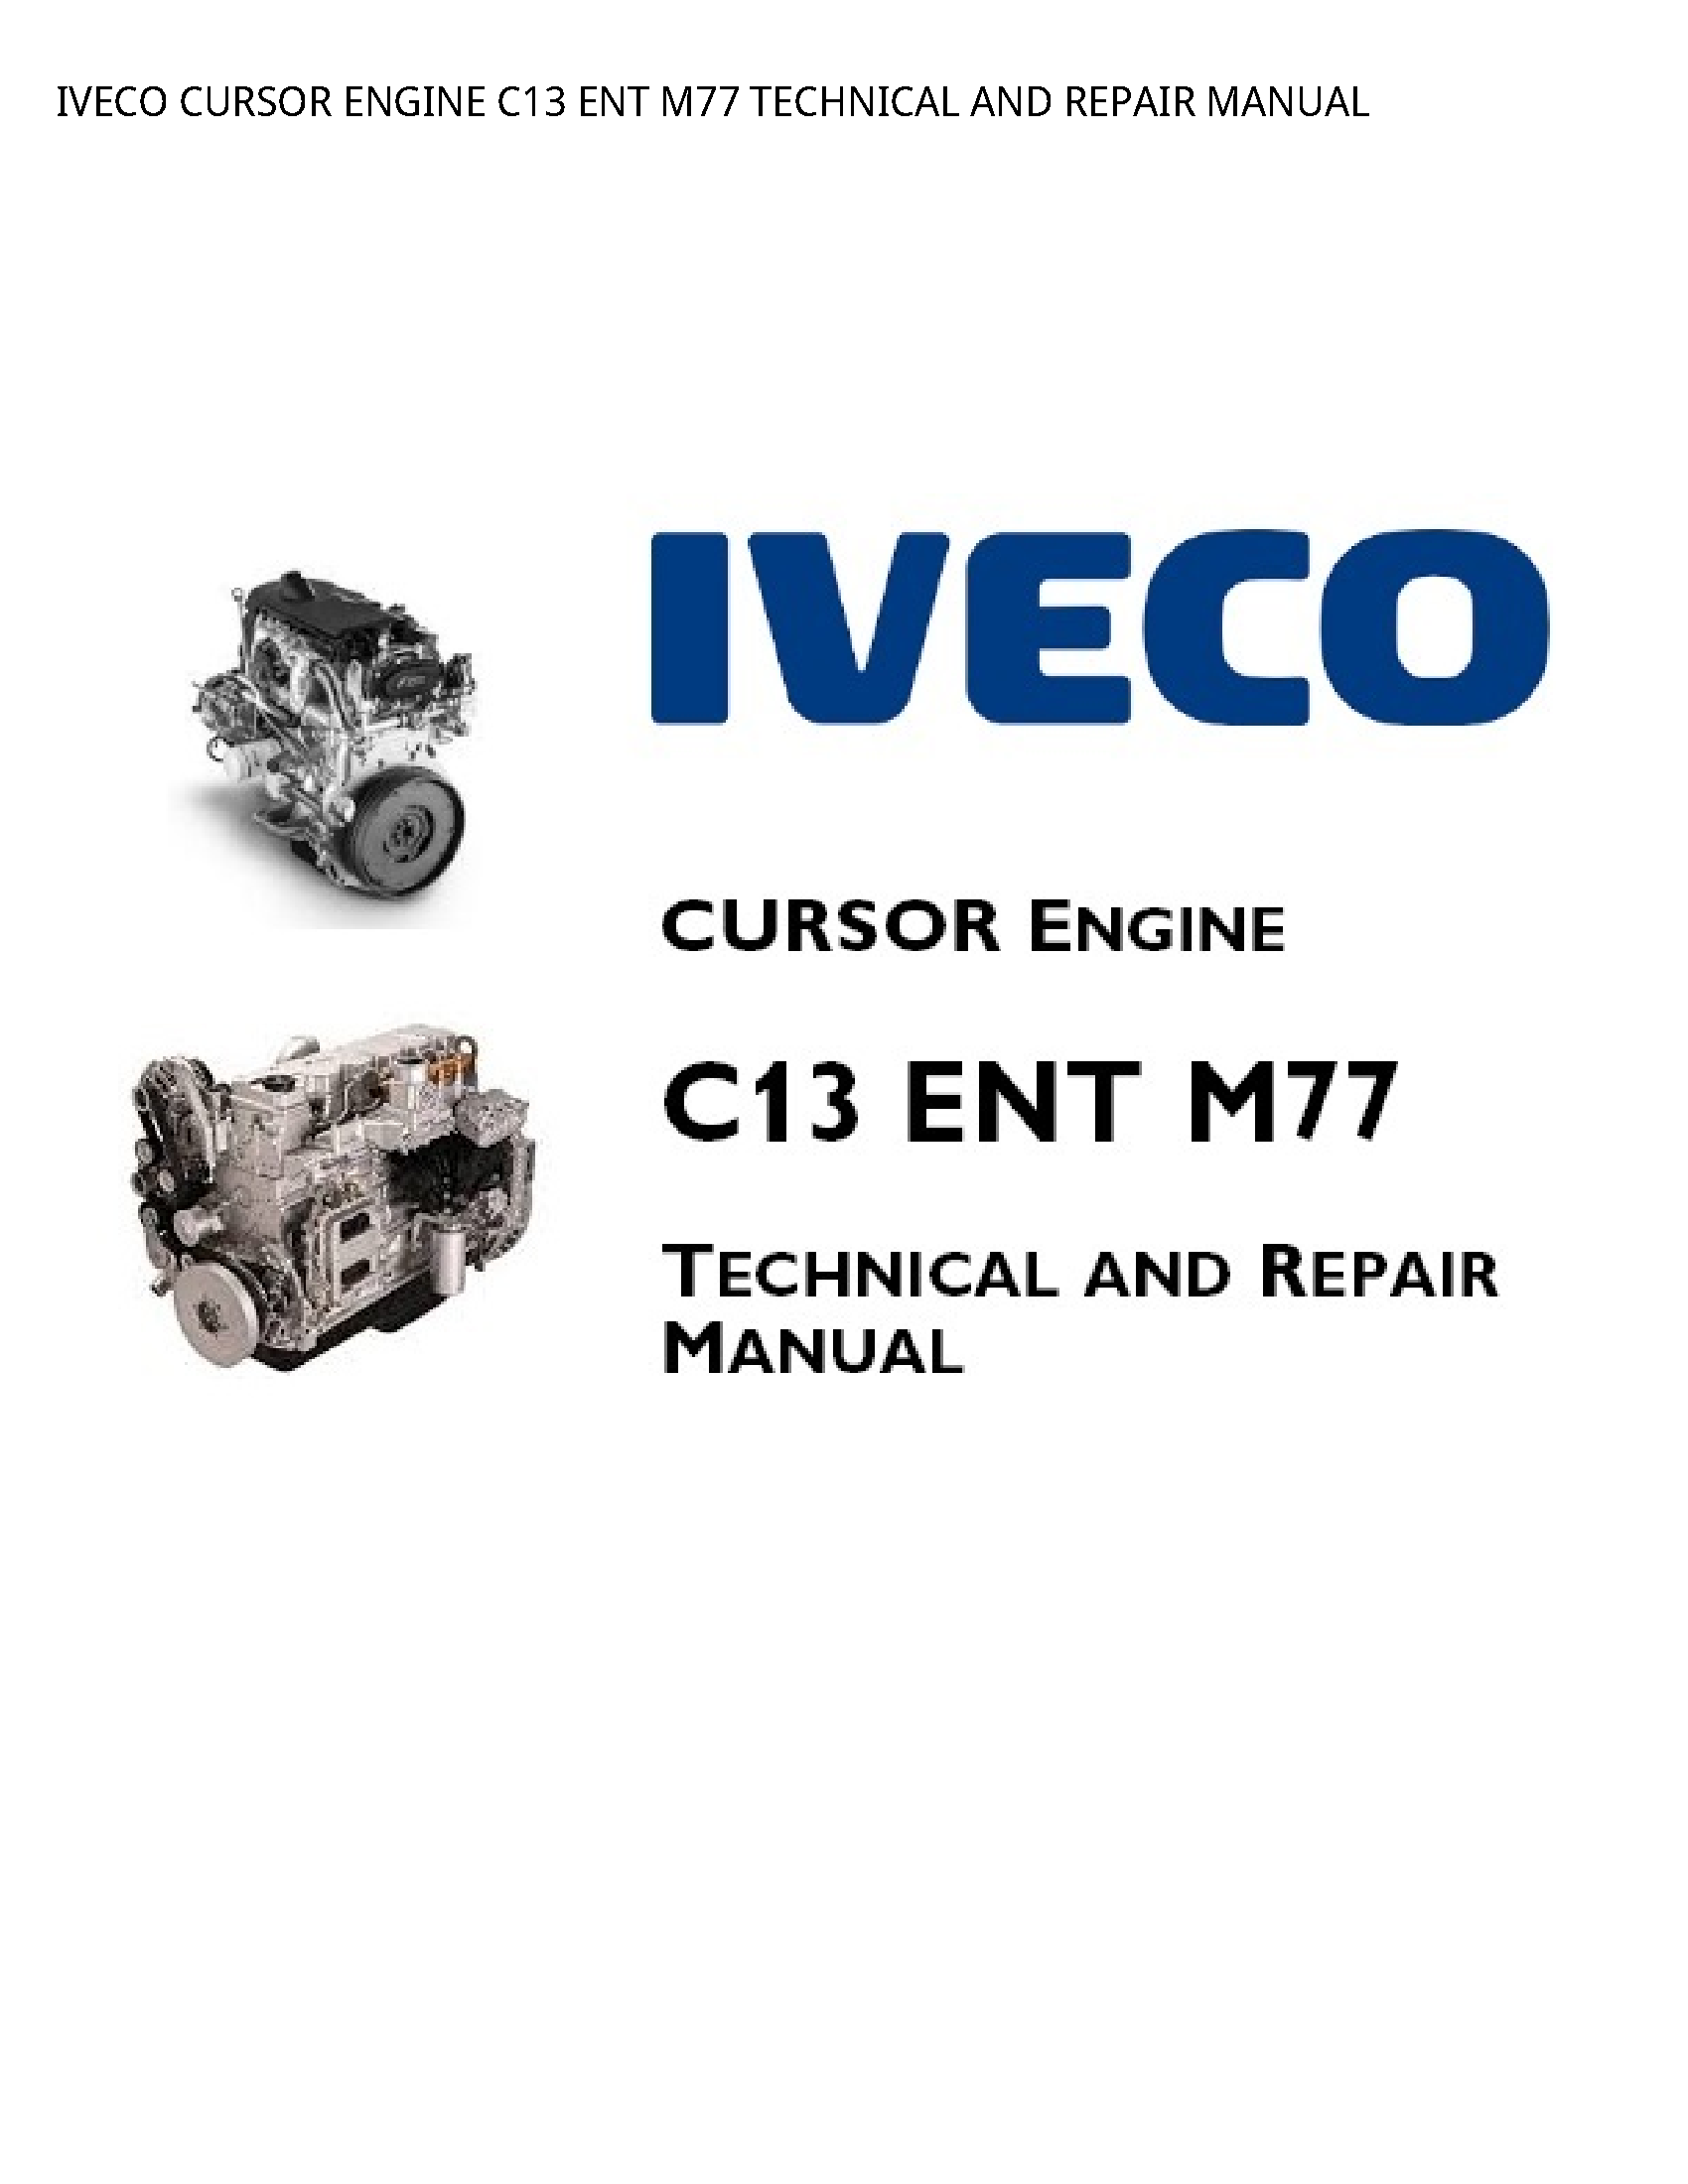 Iveco C13 CURSOR ENGINE ENT TECHNICAL AND REPAIR manual